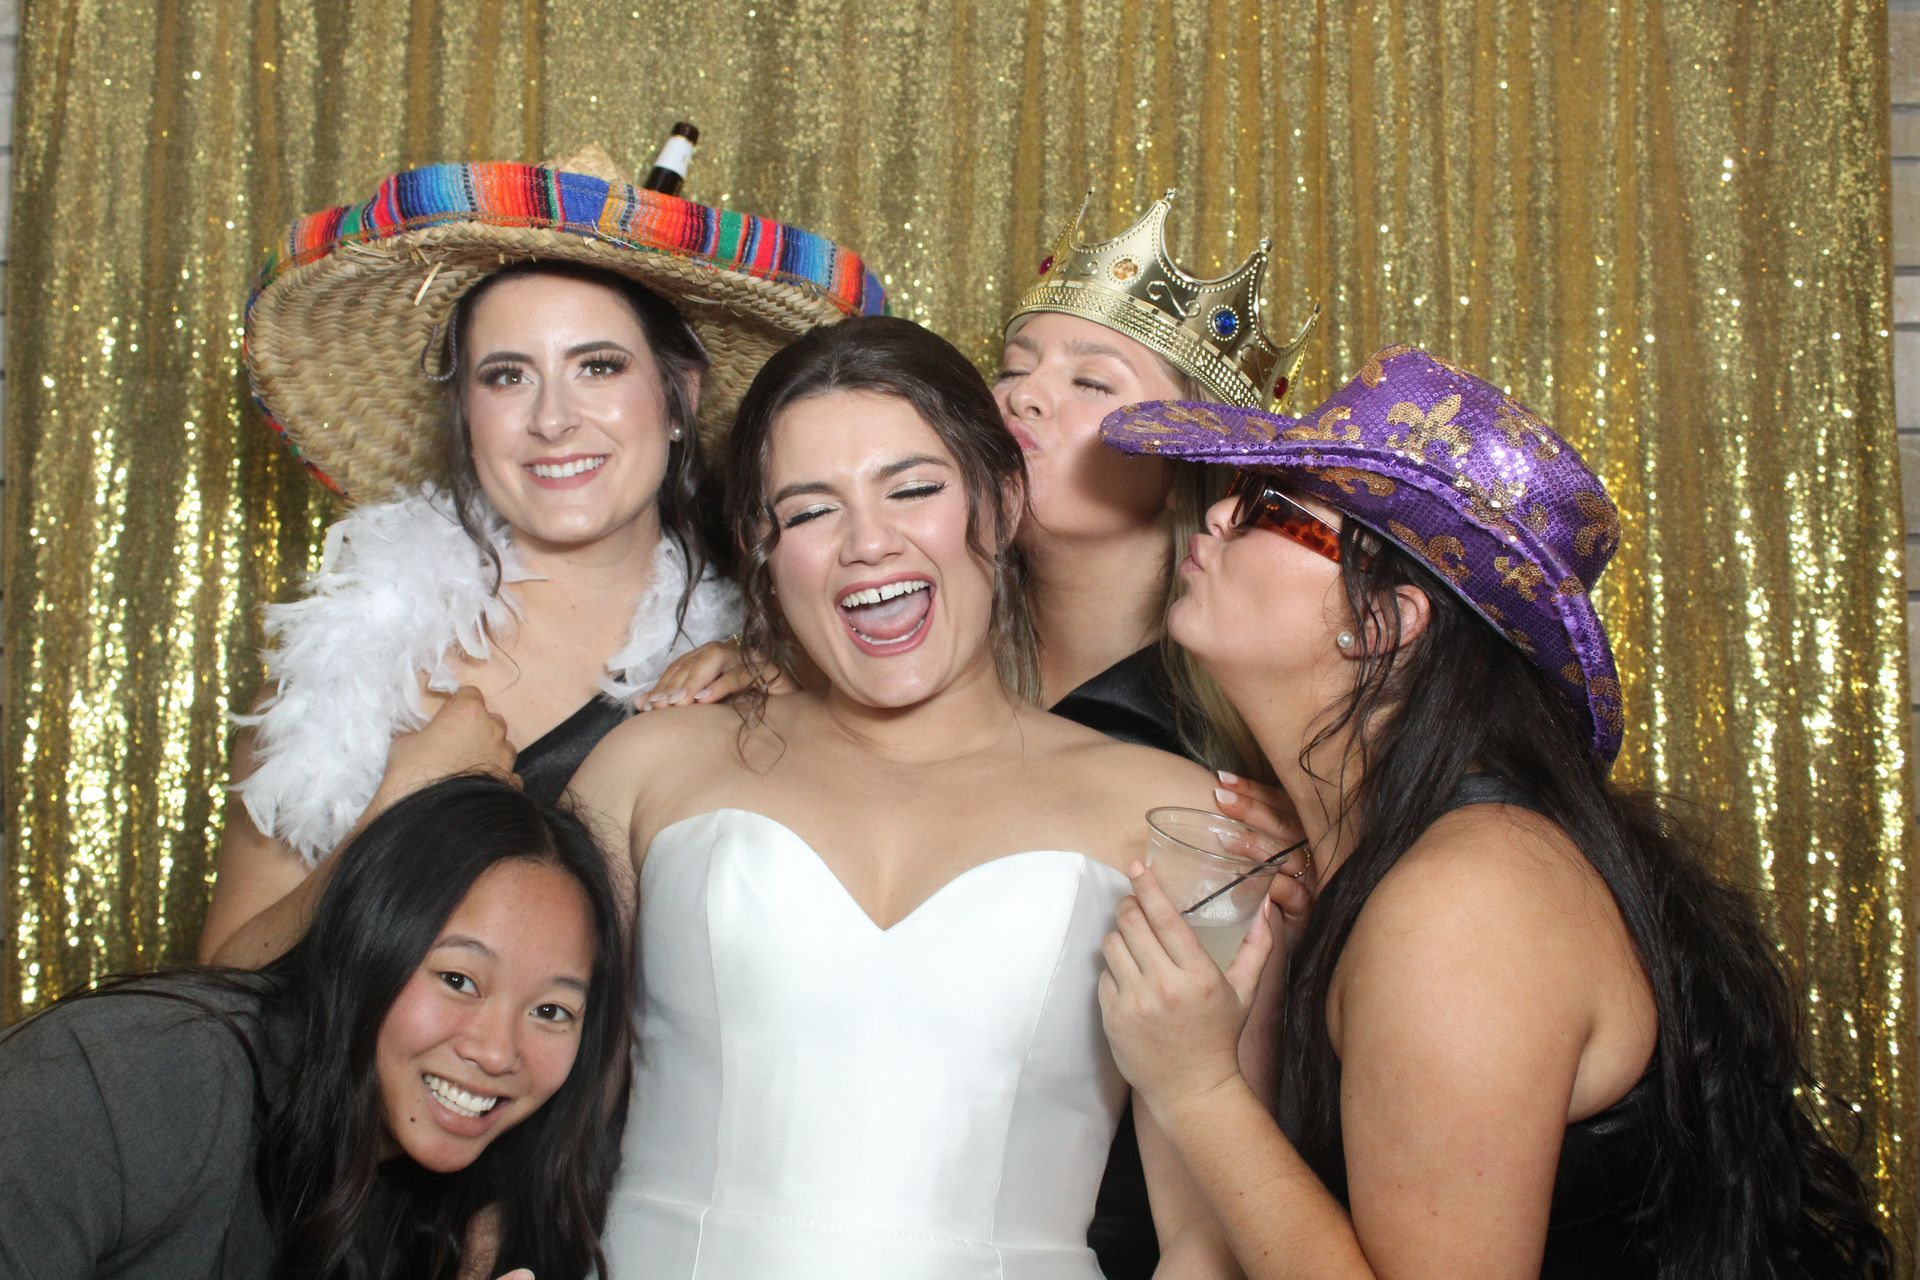 Wedding attendees enjoys striking poses with a photo booth in Waco.